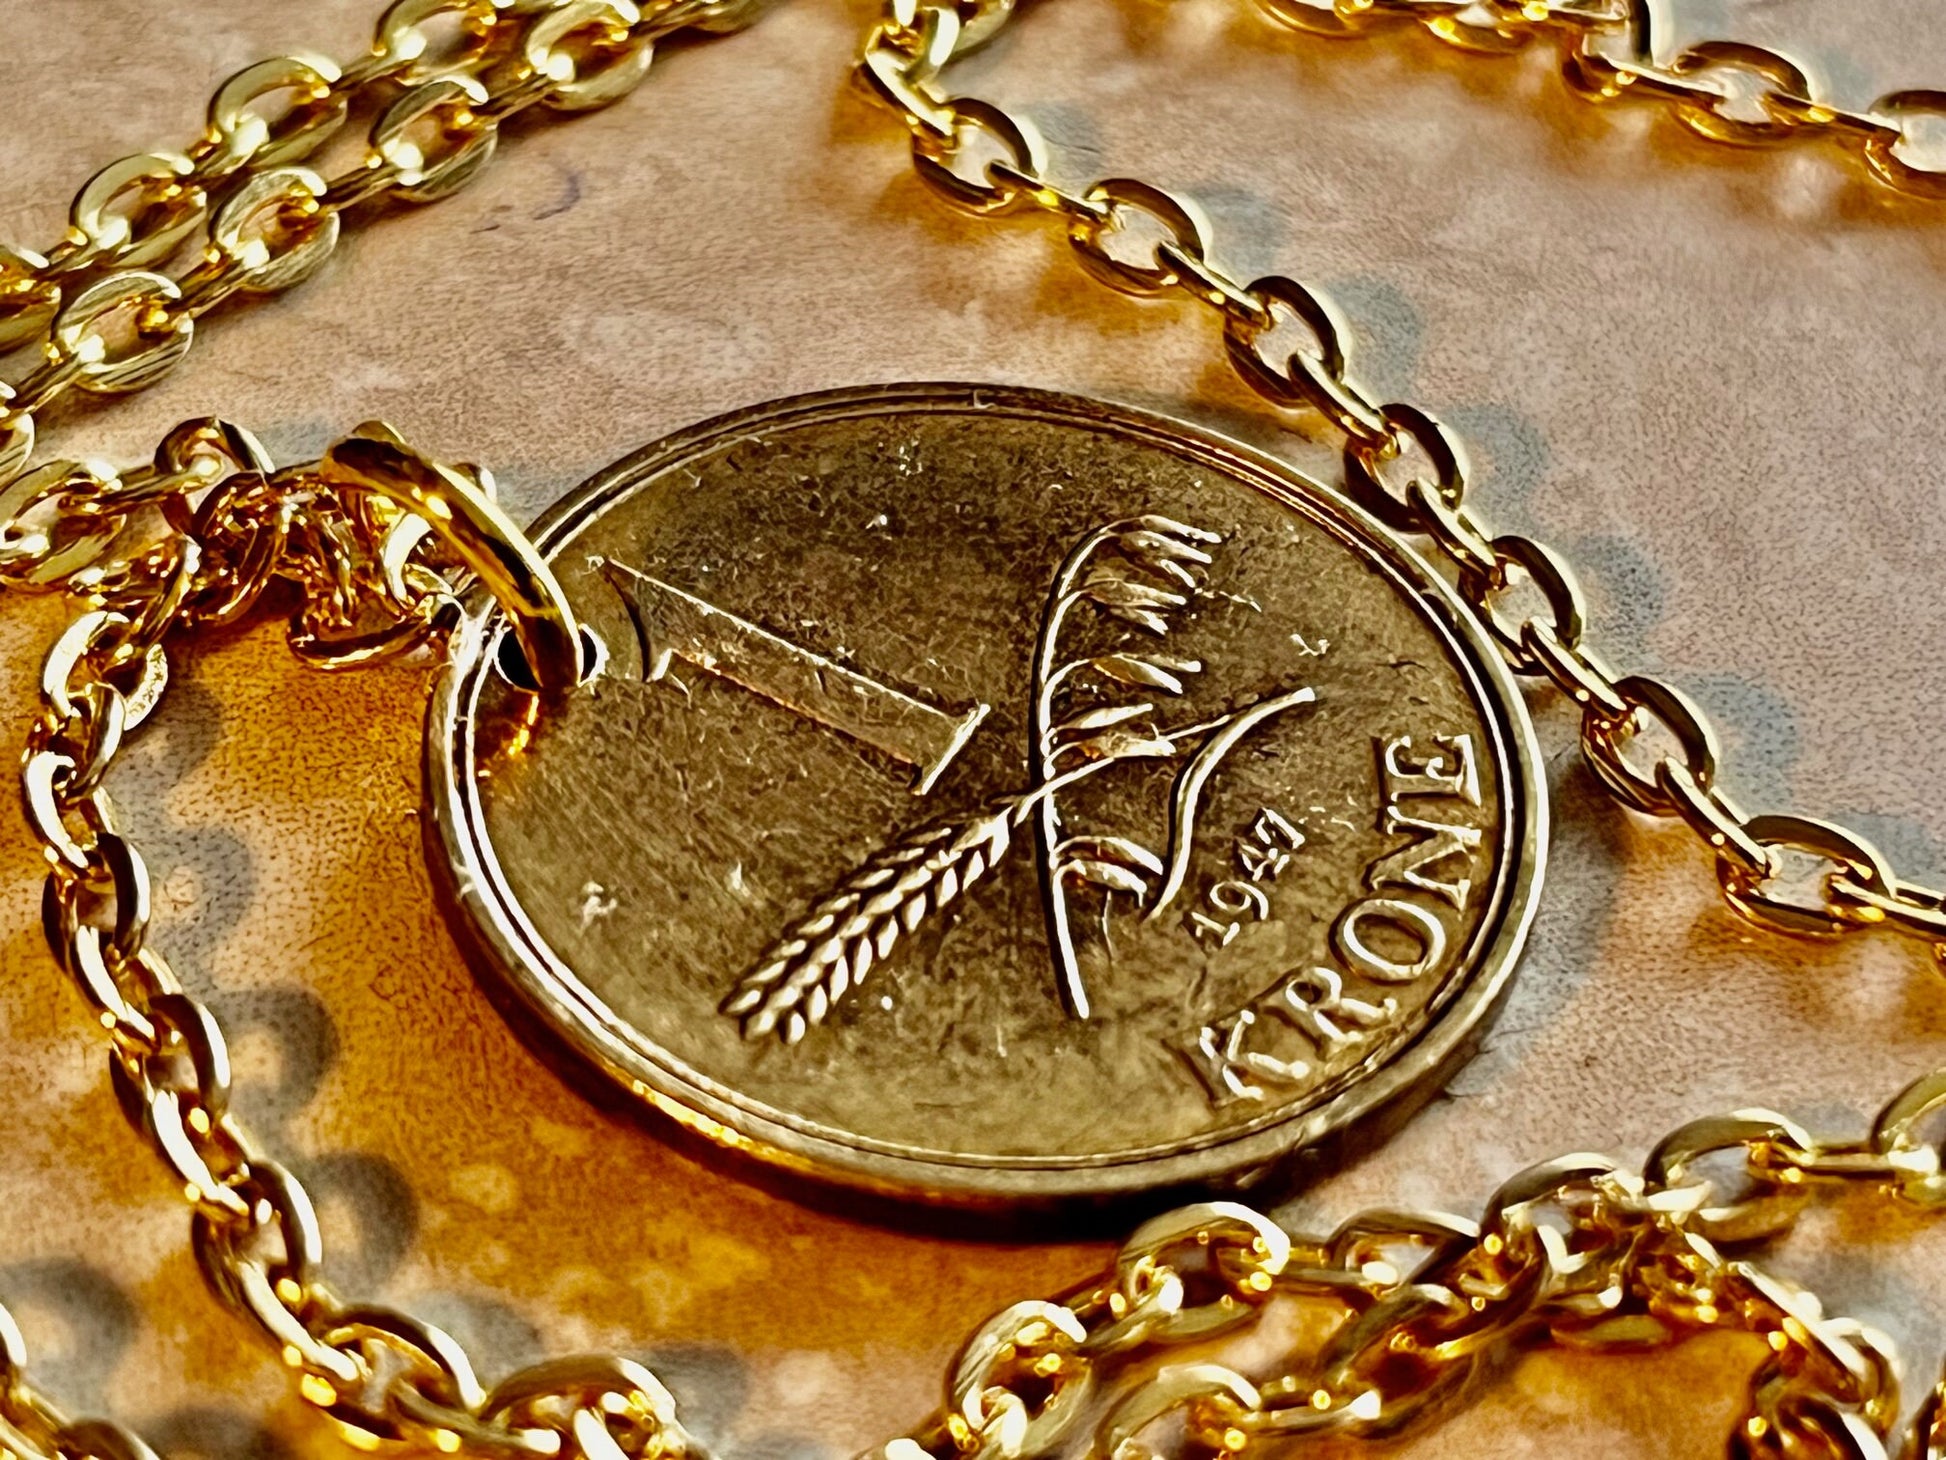 Denmark Coin Pendant 1 Krone Danmark Personal Necklace Old Vintage Handmade Jewelry Gift Friend Charm For Him Her World Coin Collector